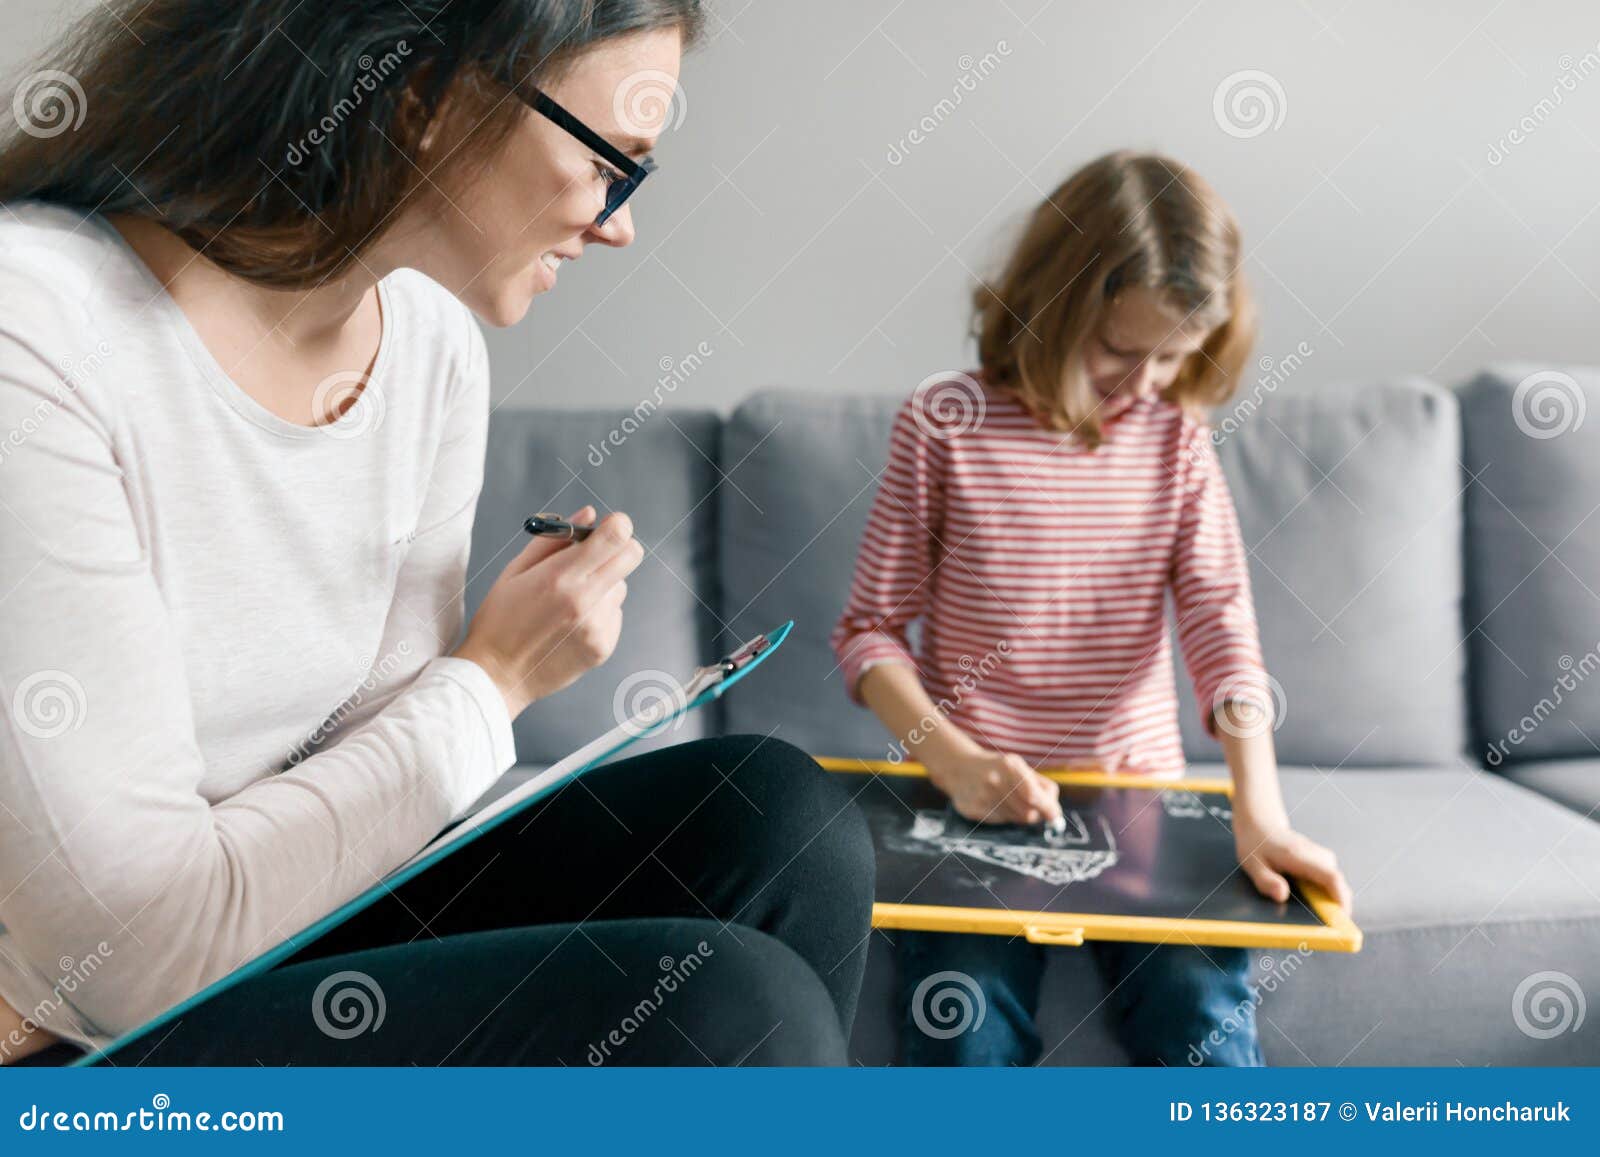 young female psychologist talking with patient child girl in office. mental health of children